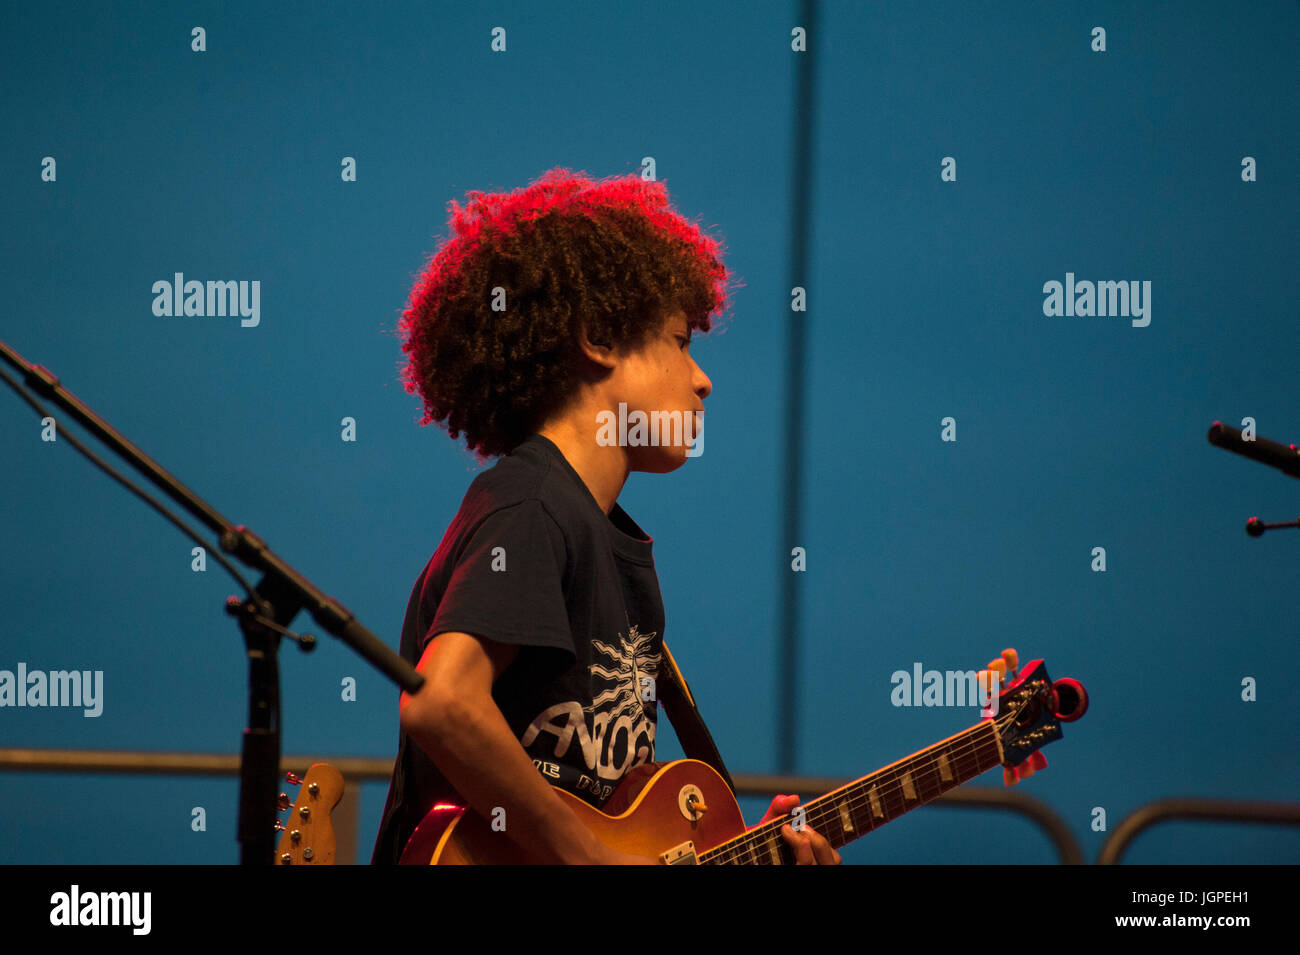 Brandon Niederauer “Taz,” a 14-year-old guitarist and vocalist, played with the Los Lobos band during a blues concert in Battery Park City, Manhattan. Stock Photo